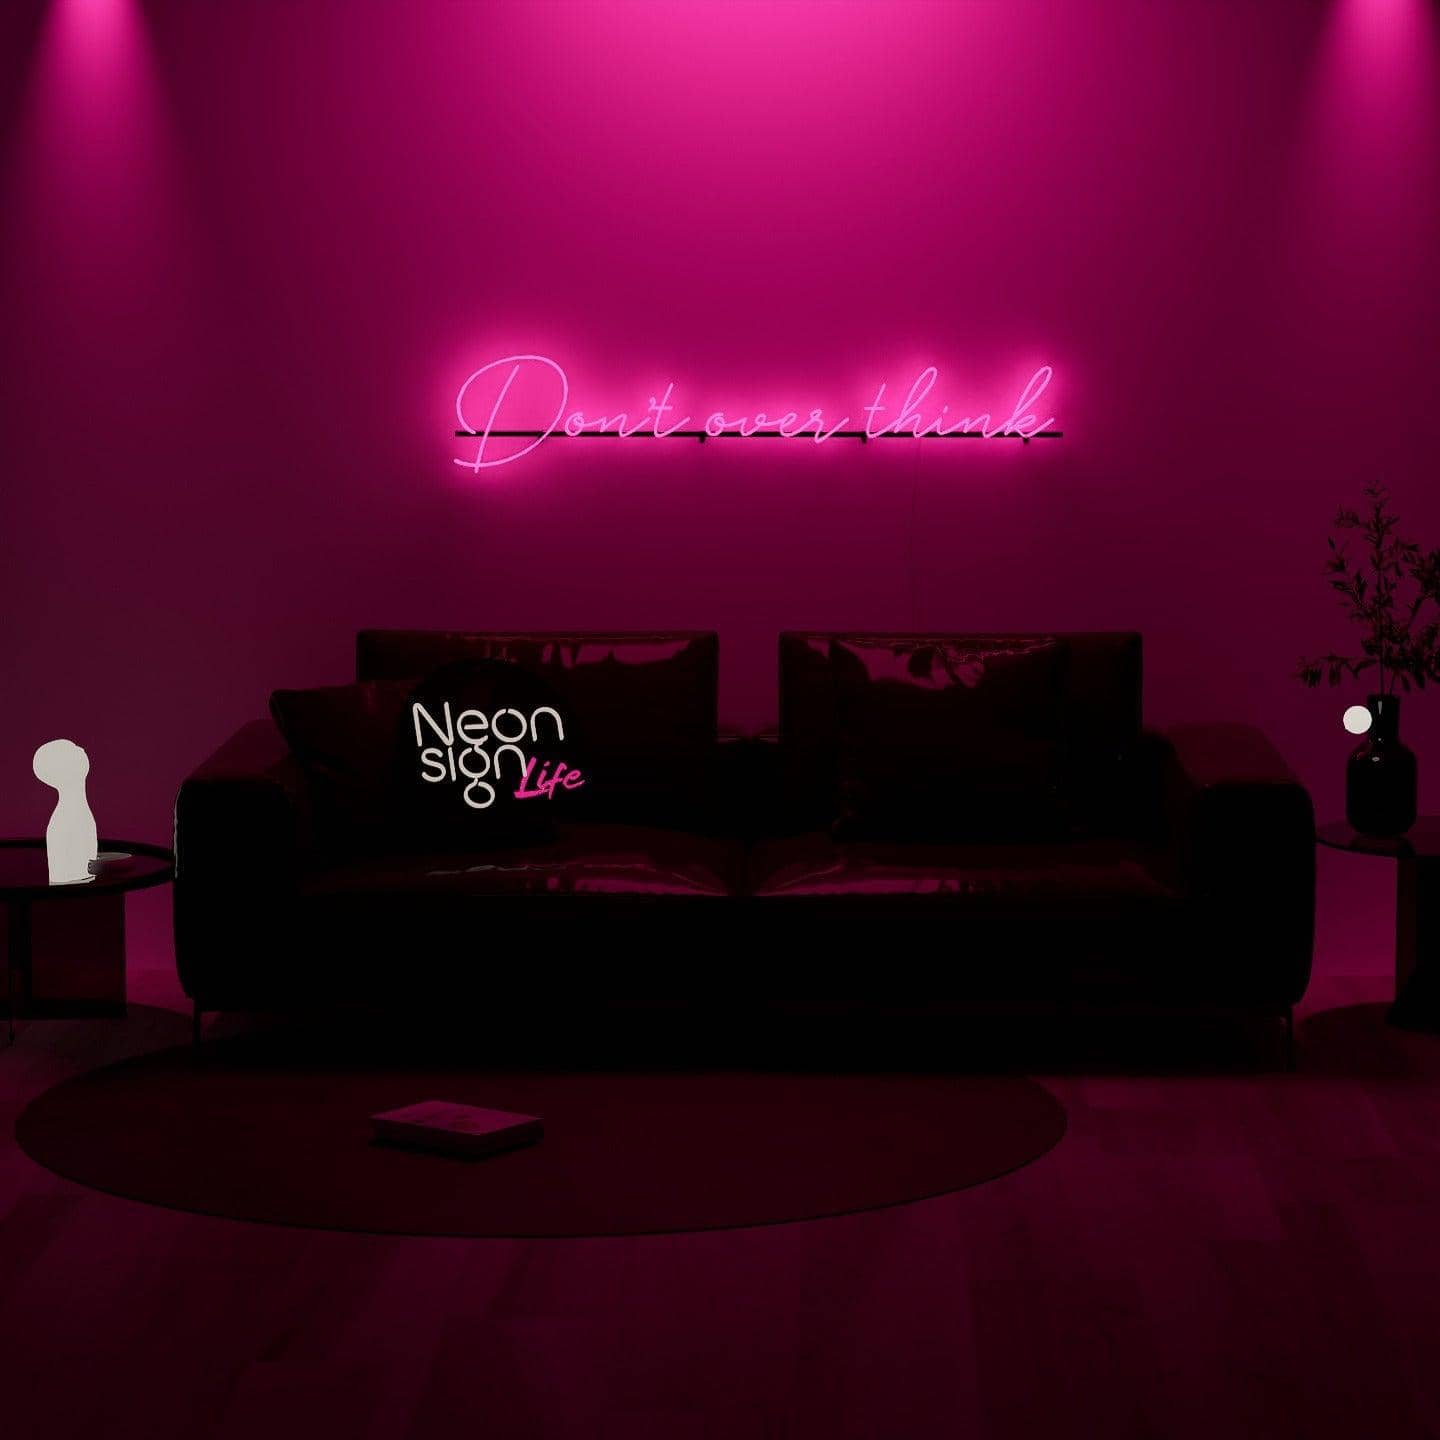 light-up-pink-neon-lights-hanging-on-the-wall-for-display-at-night-don't-over-think